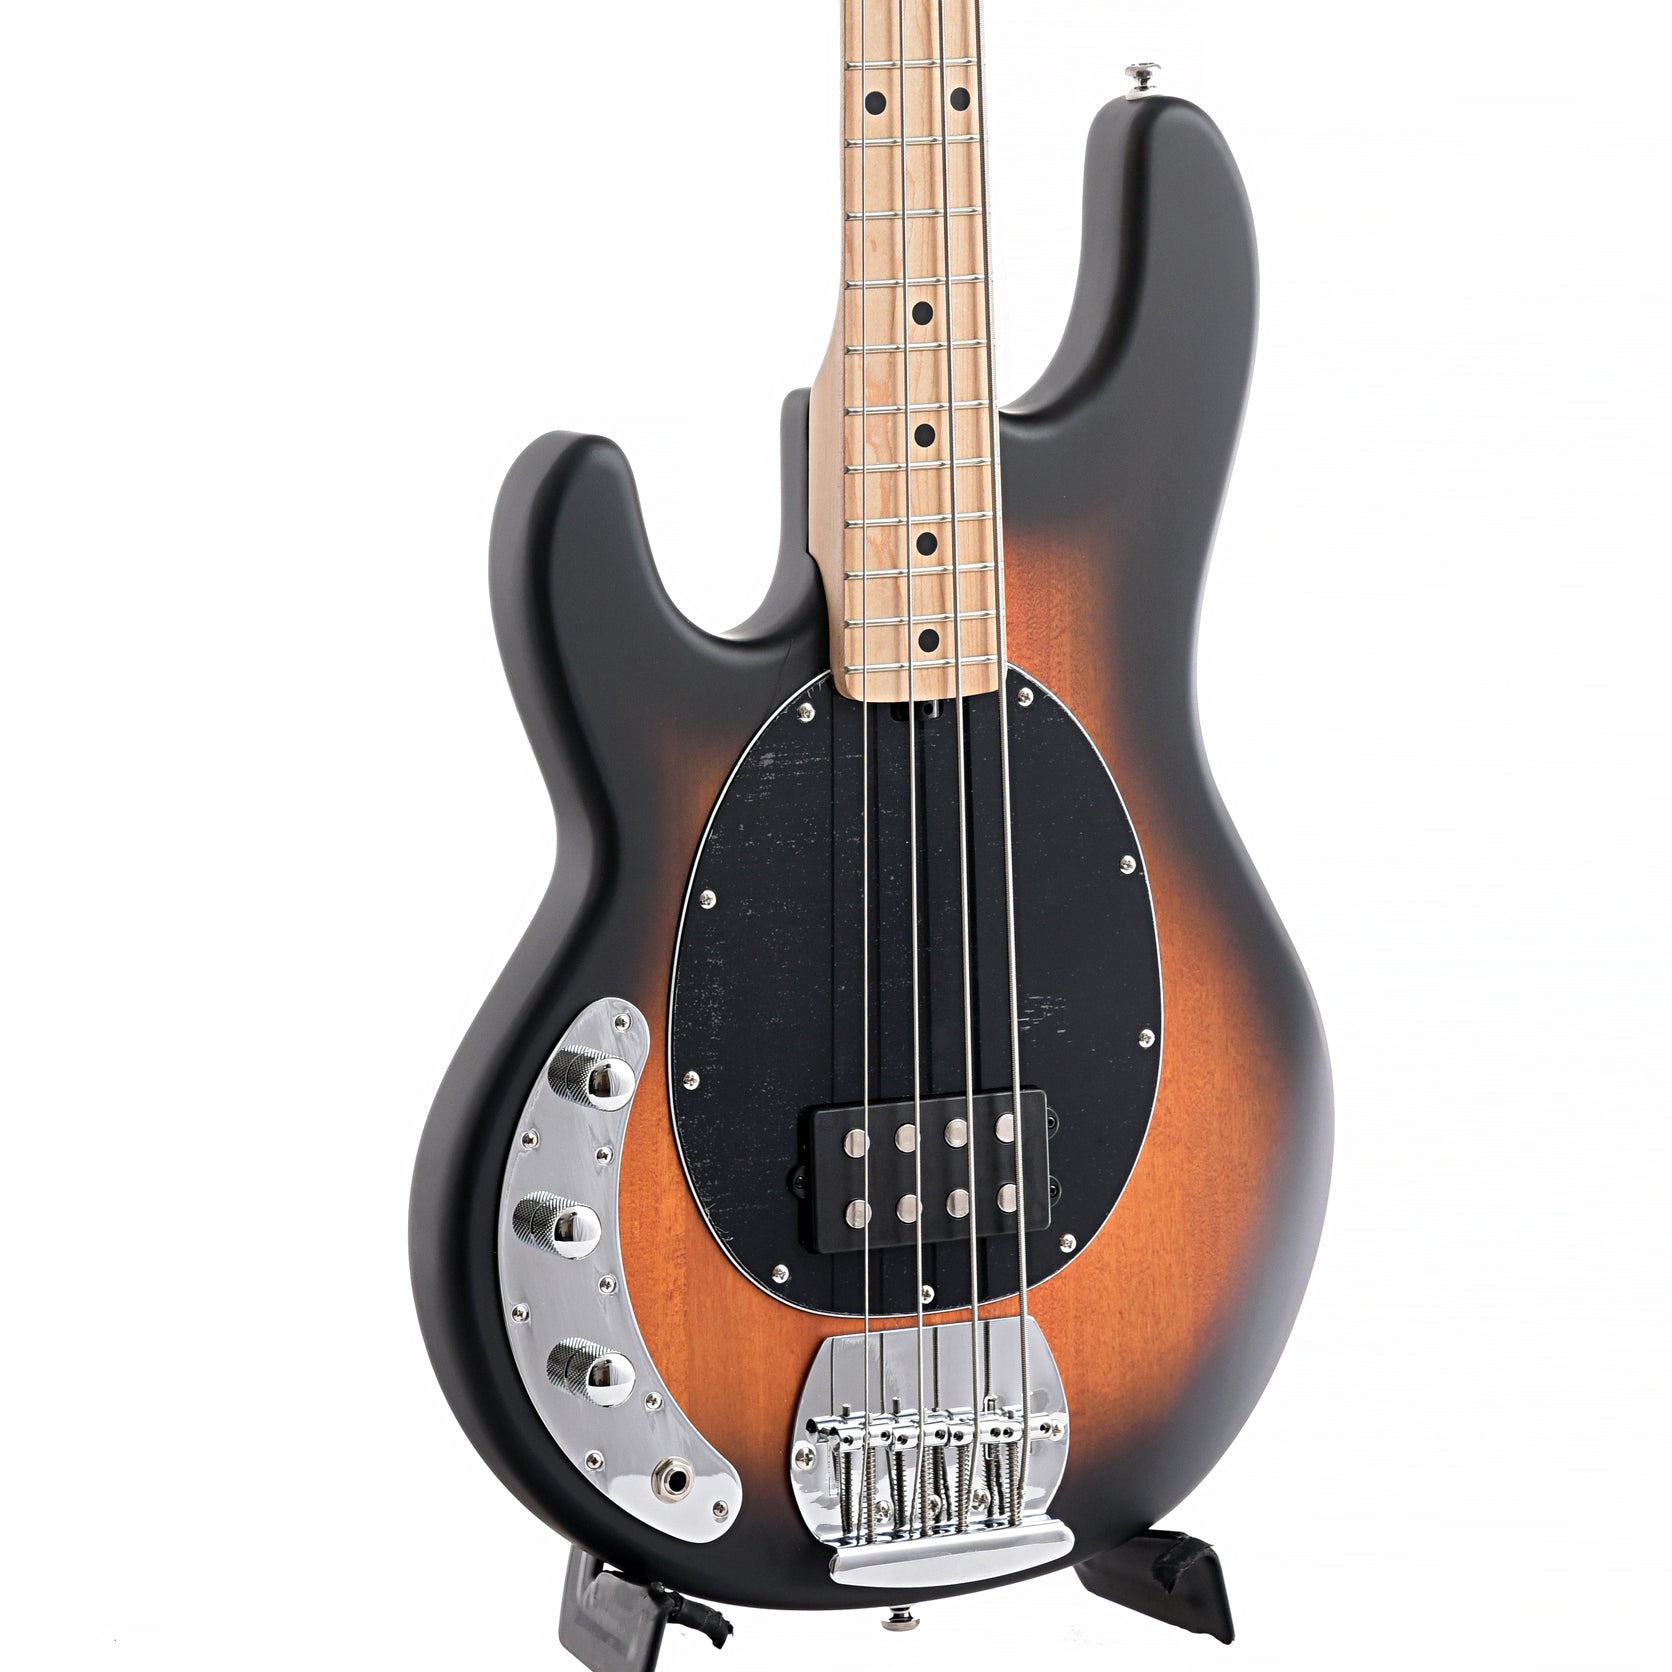 Image 2 of Sterling by Music Man 4-String Left Handed StingRay Bass, Vintage Sunburst - SKU# RAY4LH-VS : Product Type Solid Body Bass Guitars : Elderly Instruments